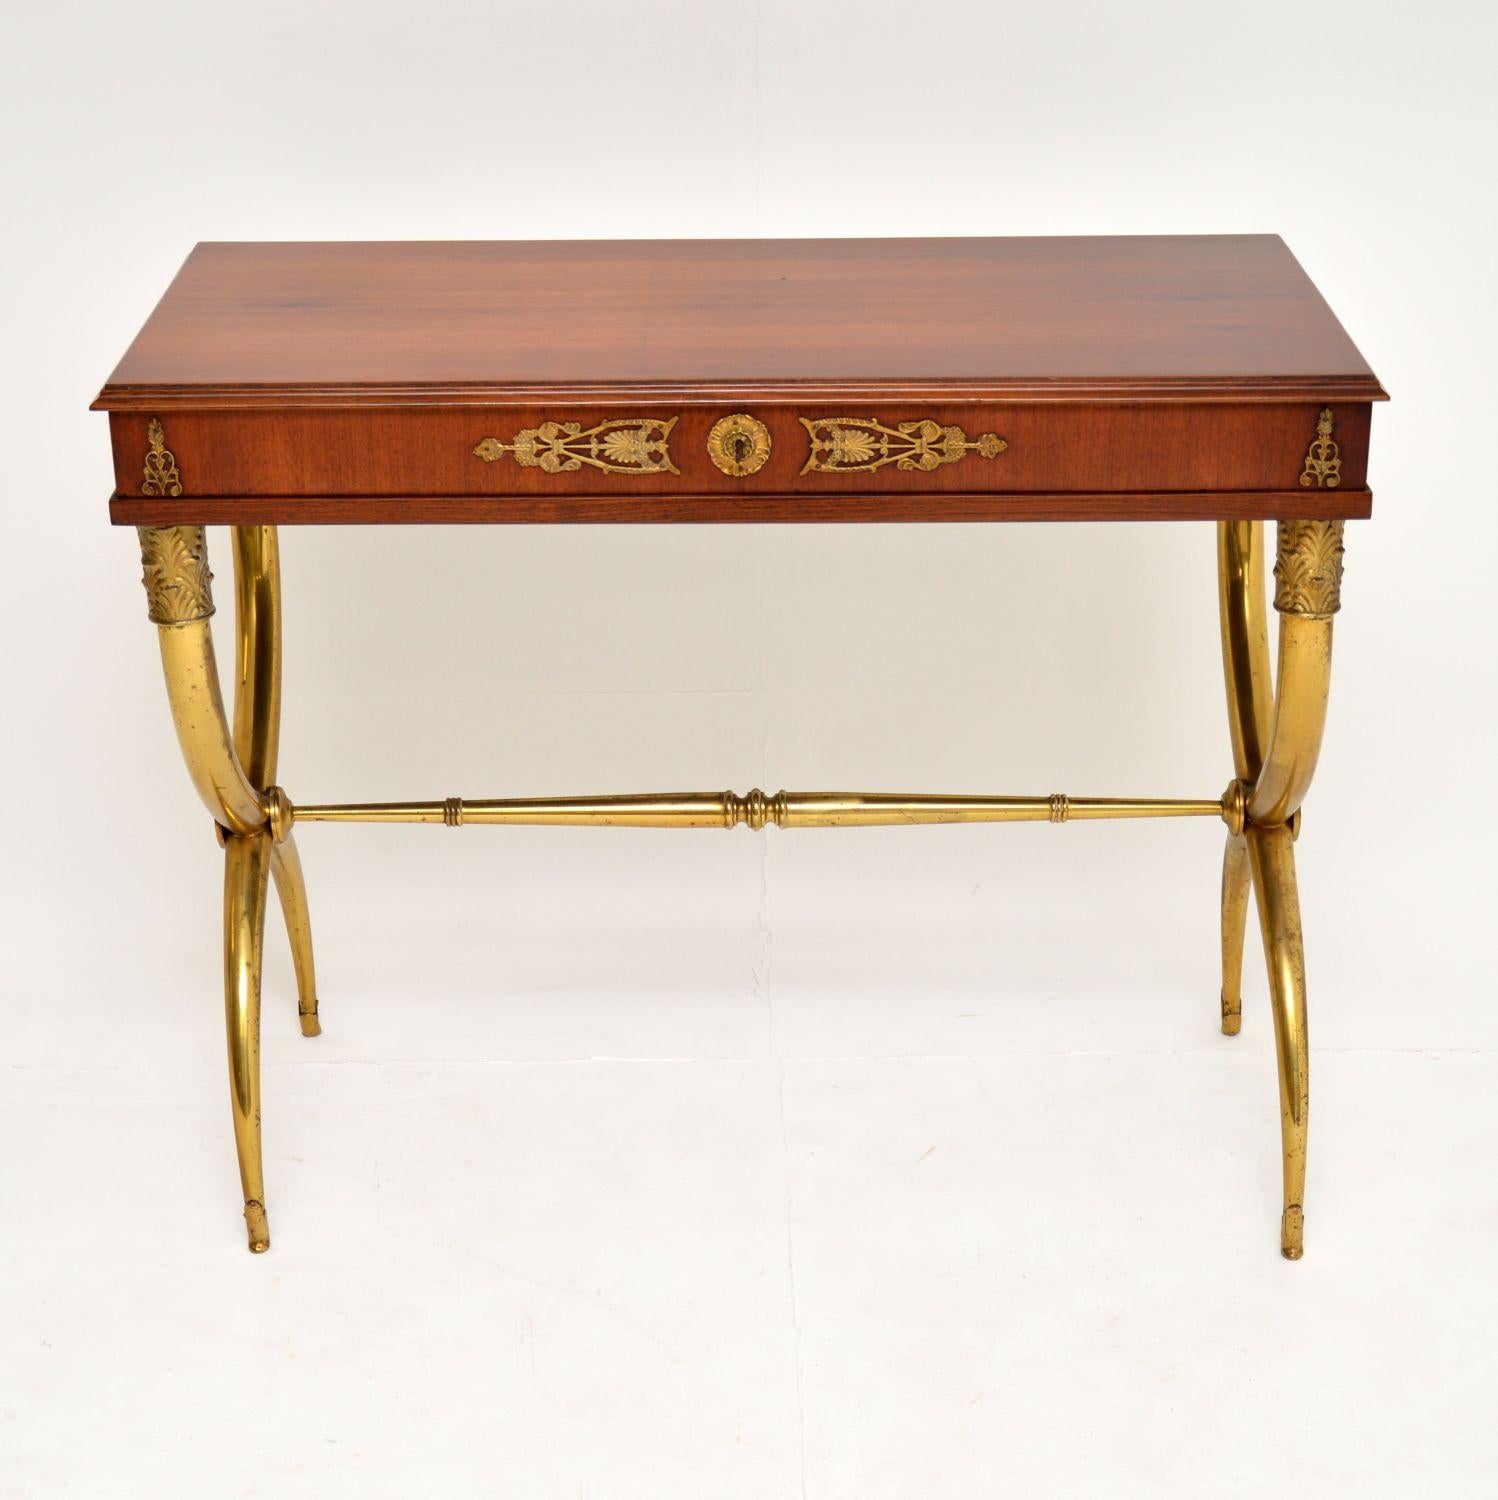 A stunning and very stylish antique neoclassical table, beautifully made from walnut and brass. This is in the antique Regency style and I would date it from circa 1920s-1930s. It is a great size to be used as a desk, dressing table or console side